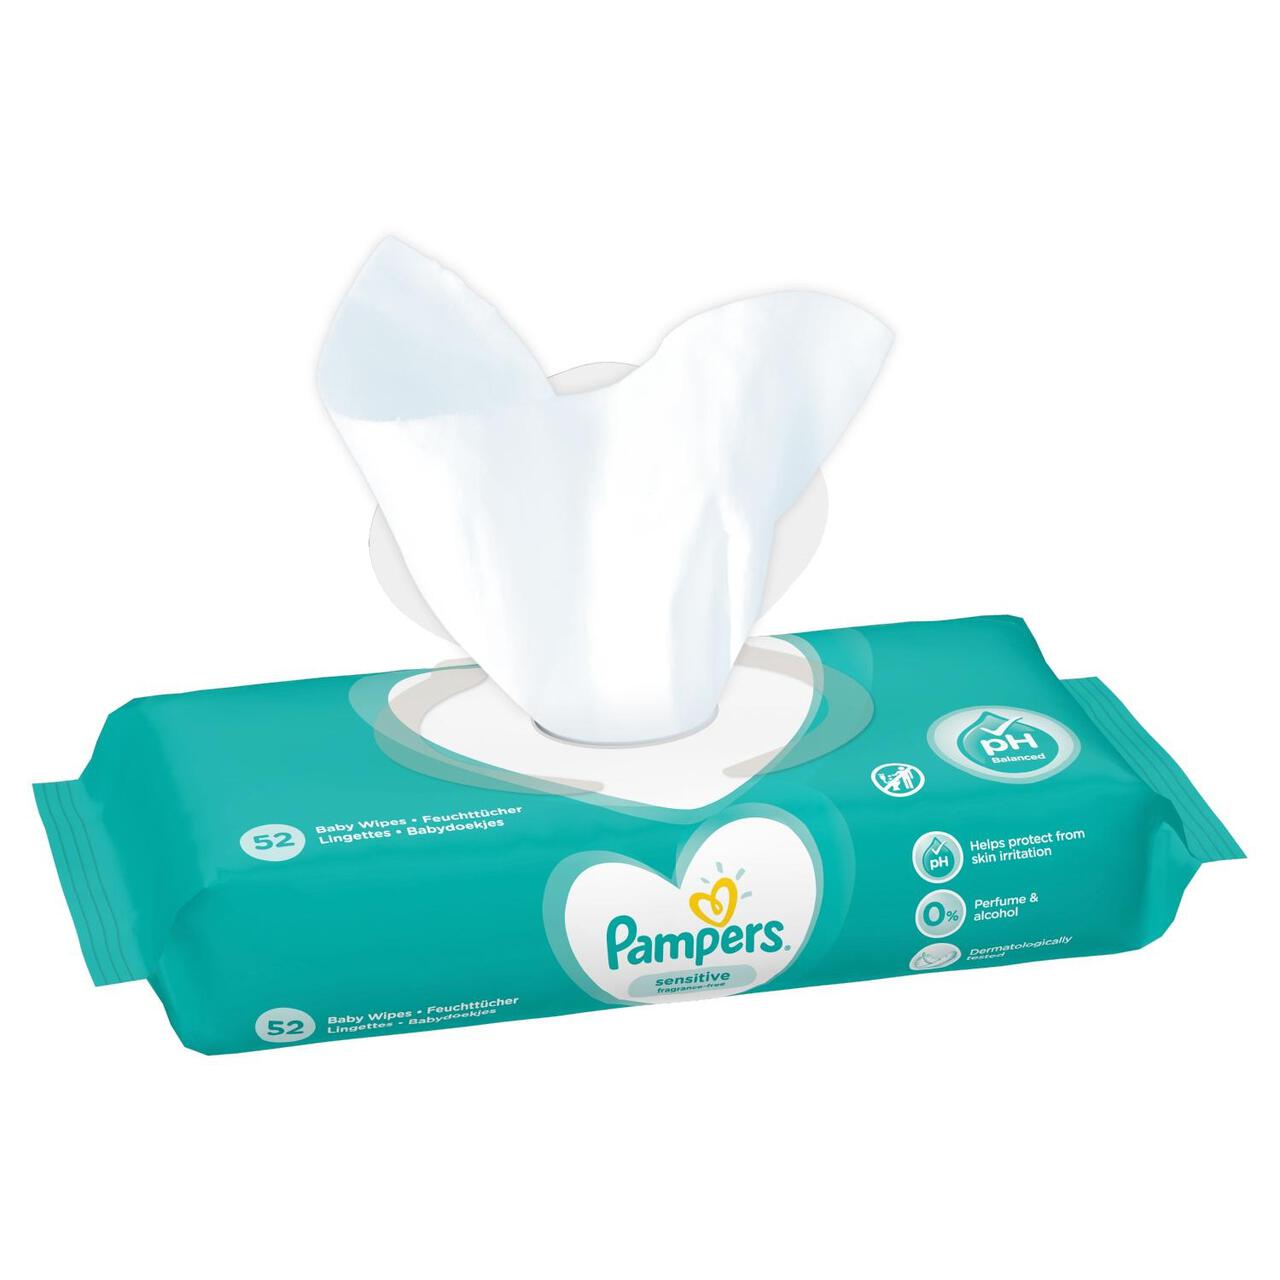 Pampers Sensitive Baby Wipes x 52 52 per pack